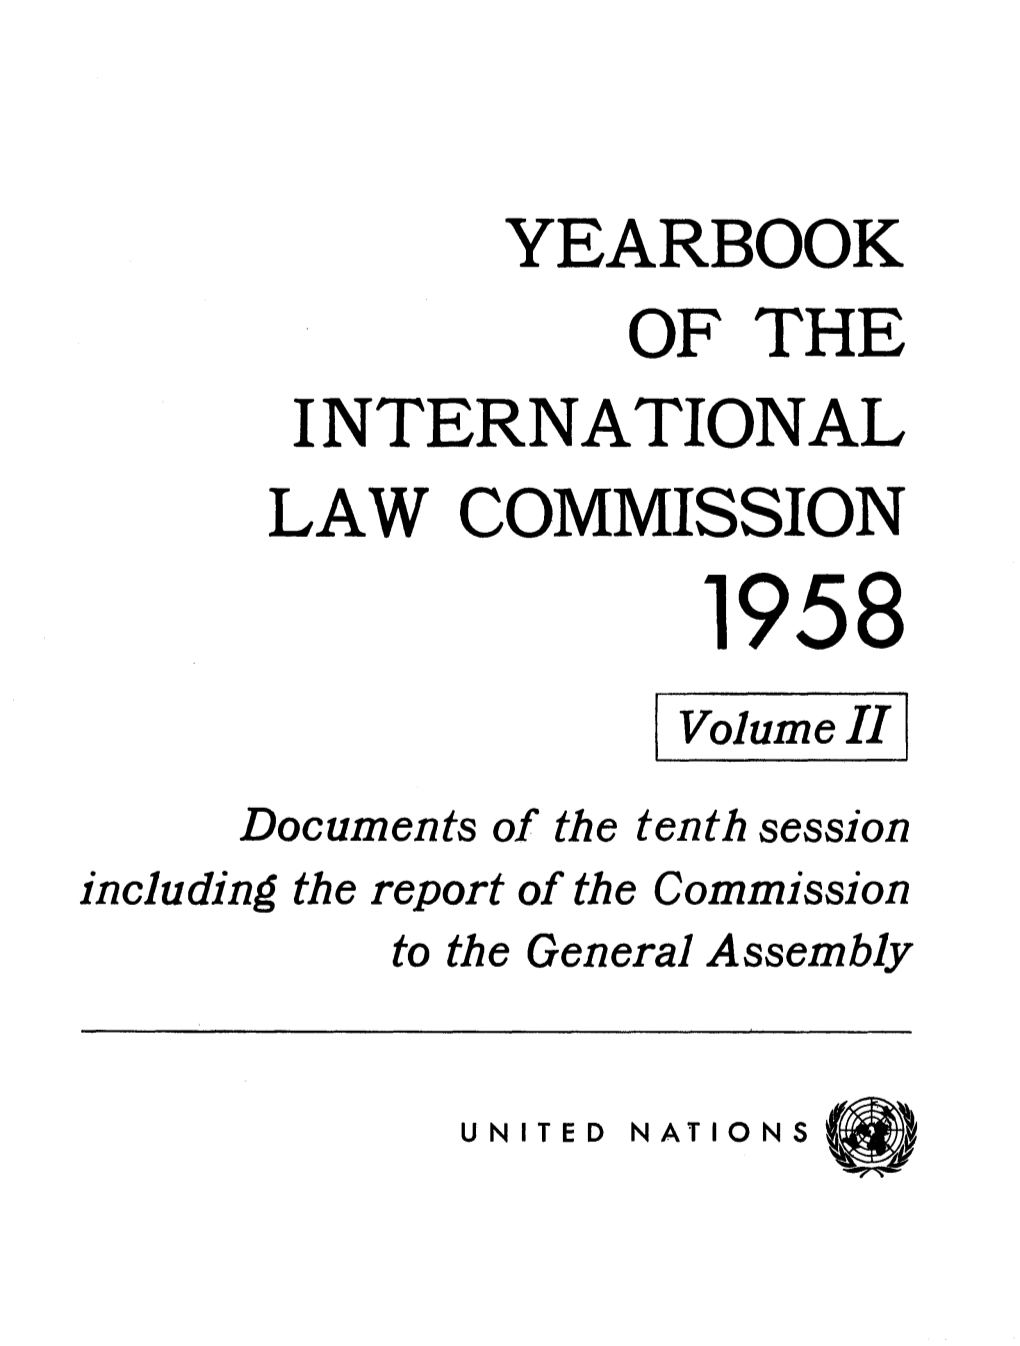 YEARBOOK of the INTERNATIONAL LAW COMMISSION 1958 Volume II Documents of the Tenth Session Including the Report of the Commission to the General Assembly